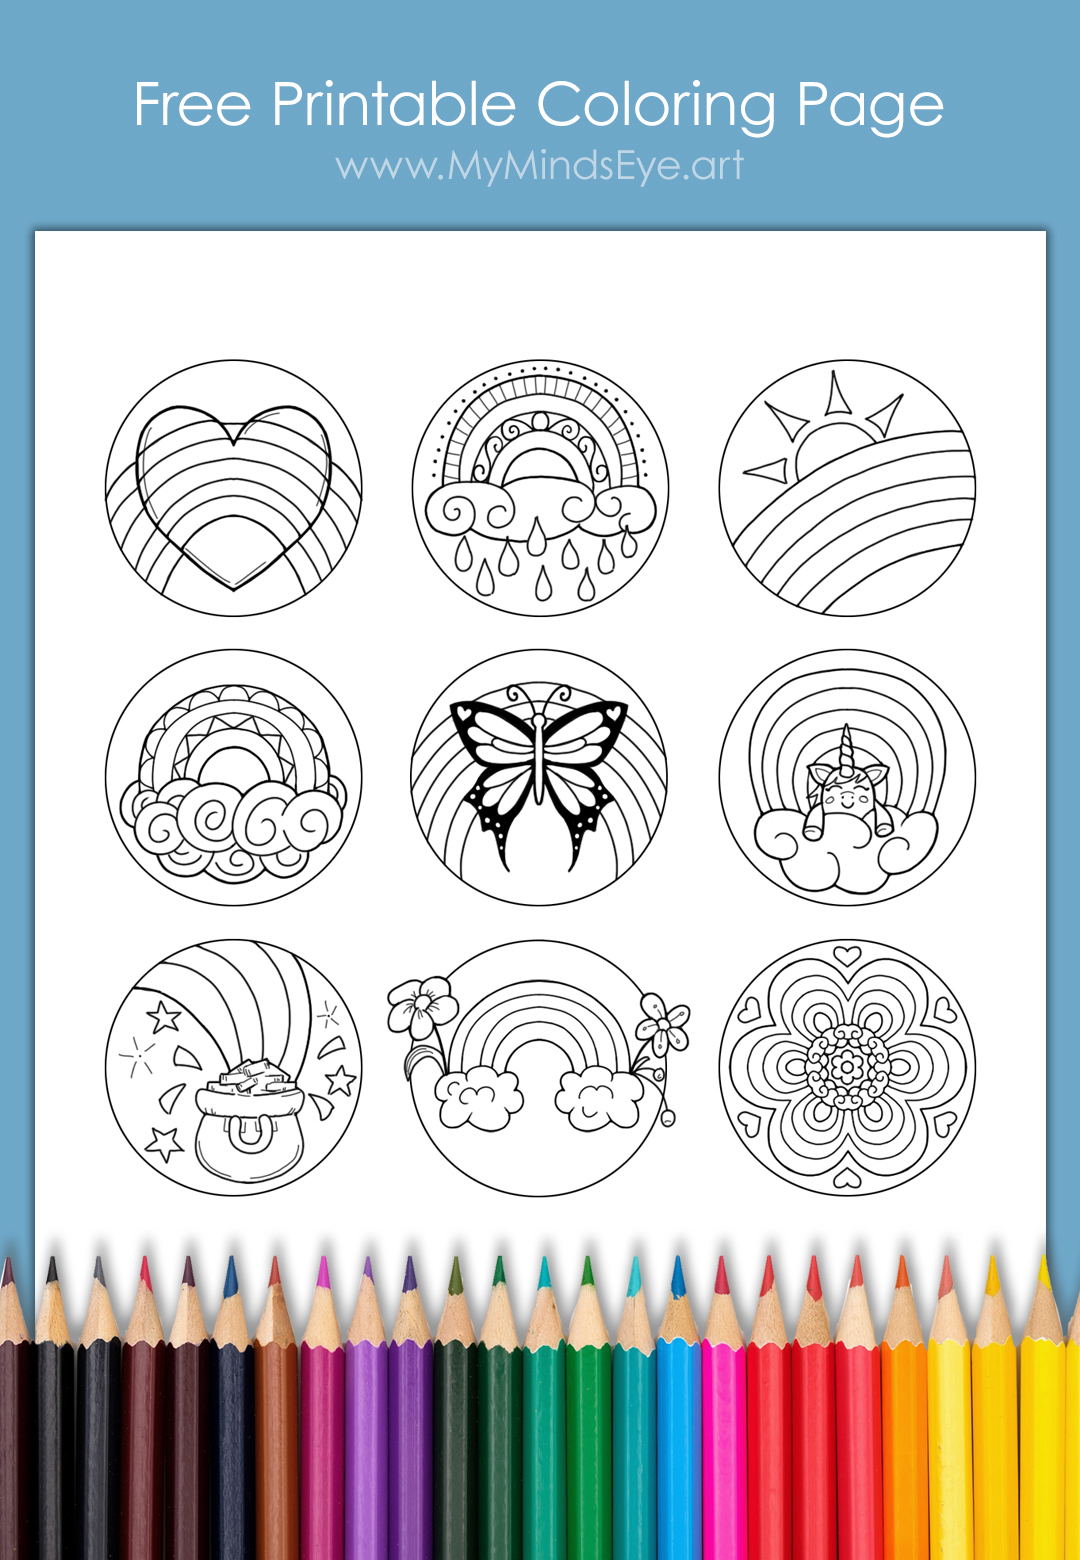 Image of a  free printable coloring page with Rainbows.